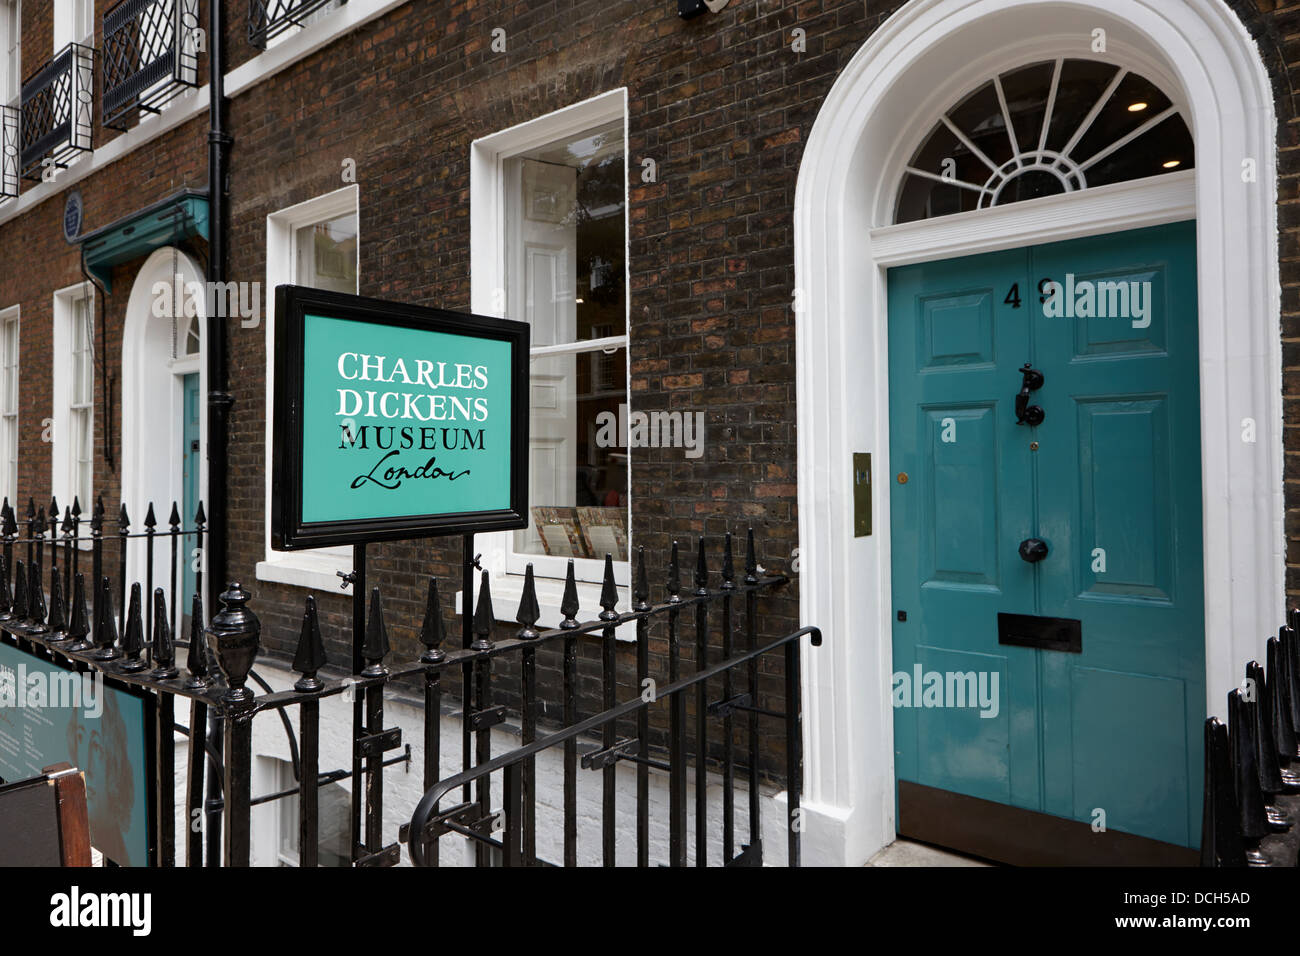 The Charles Dickens museum London England UK Stock Photo